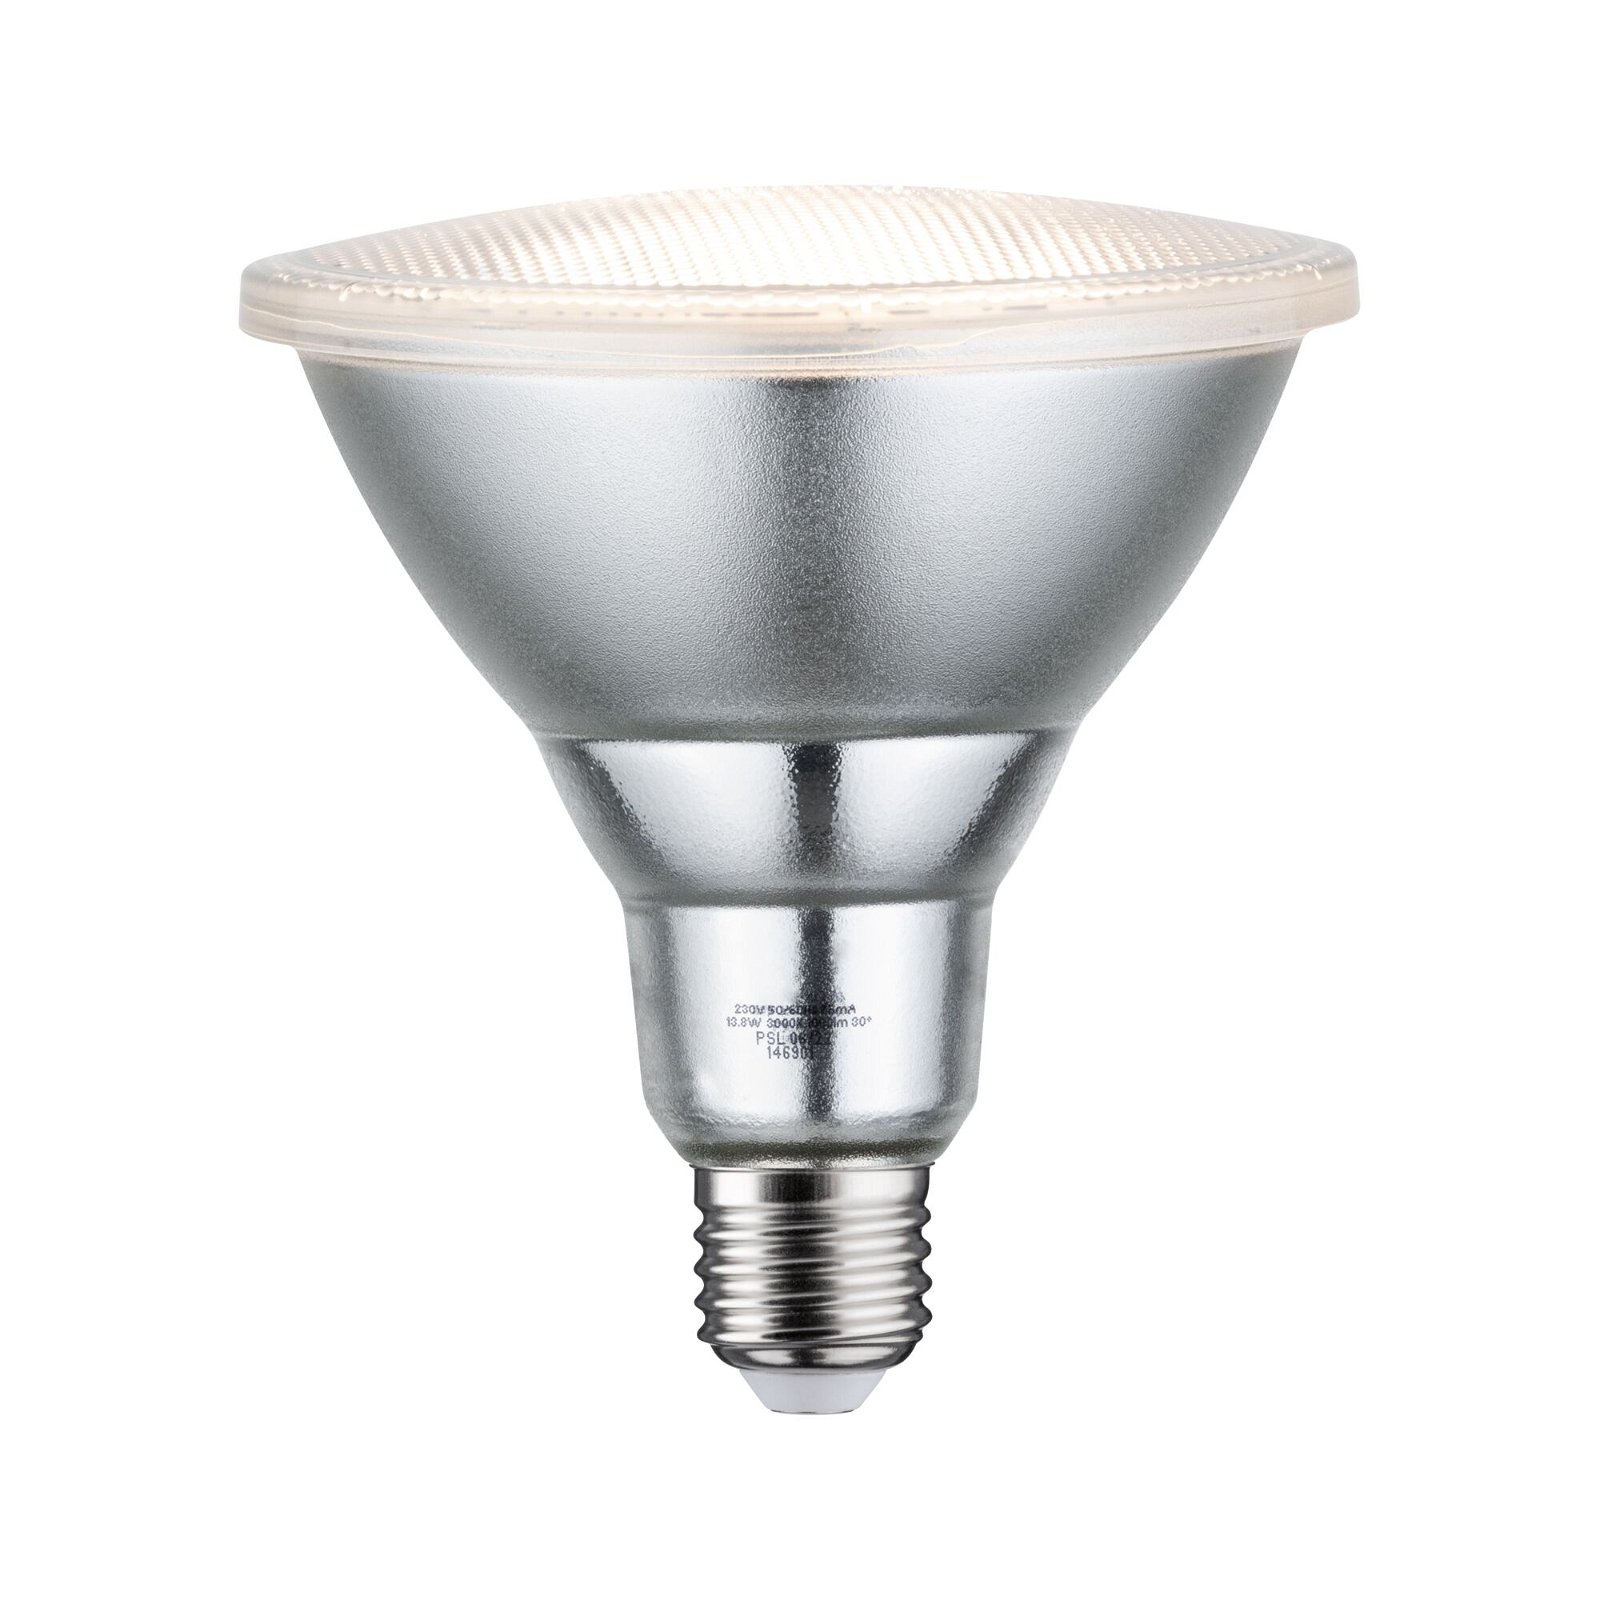 Brand-quality E27 fitting for LED lamps by Paulmann